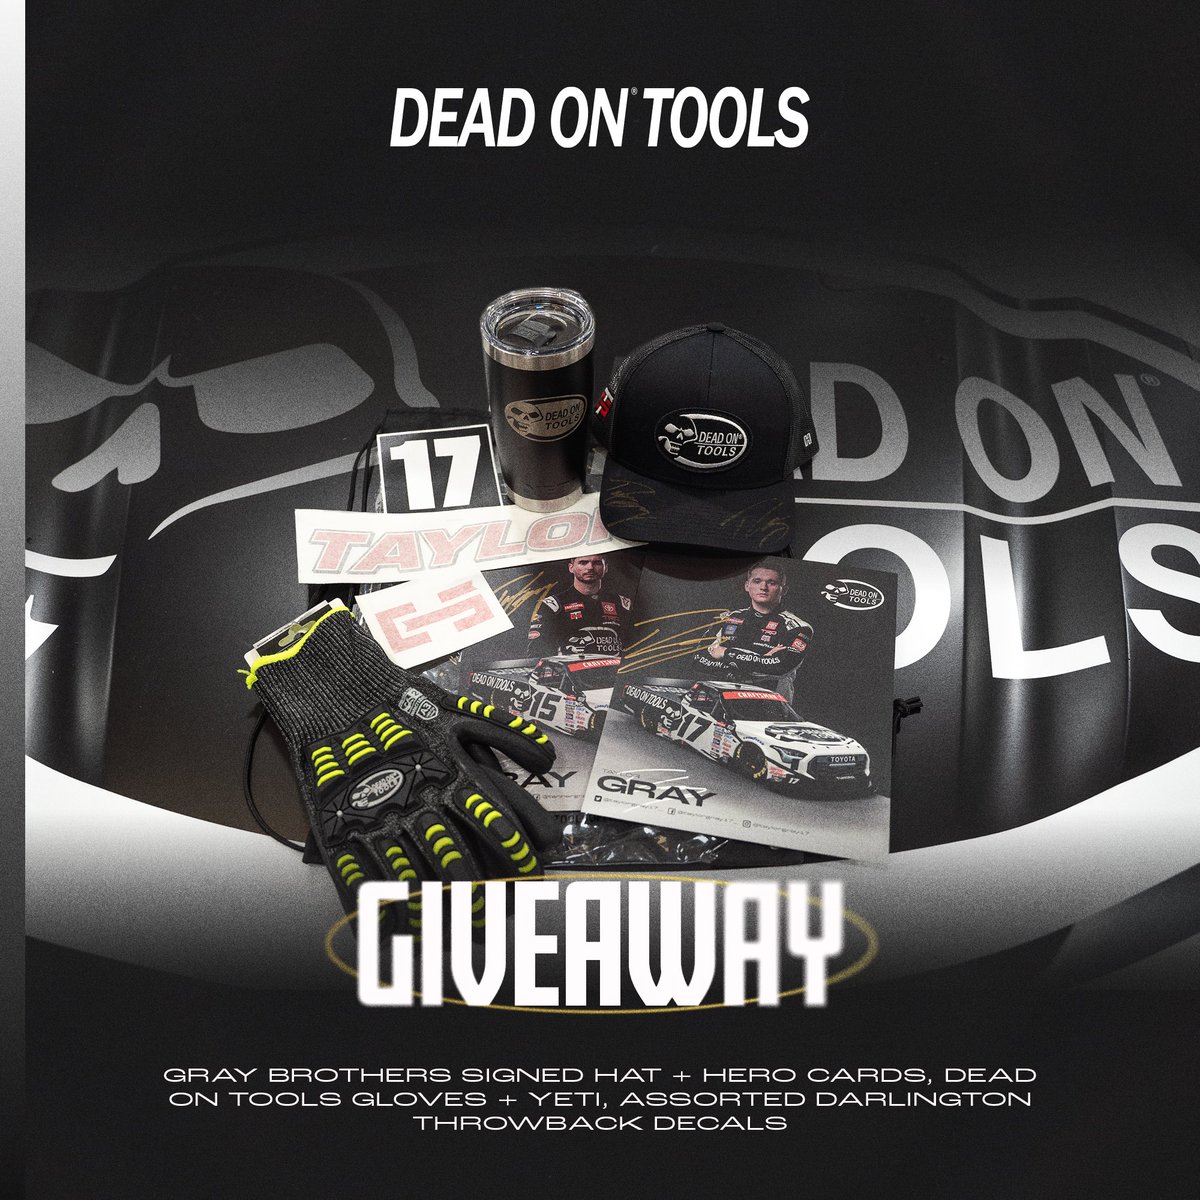 Want to win some @DeadOnTools swag!? Now’s your chance. 👇 To Enter: 1️⃣ Like & RT 2️⃣ Must follow @DeadOnTools on Twitter and IG Winner will be selected Monday at 3pm ET! #MadeToLiveOutLoud